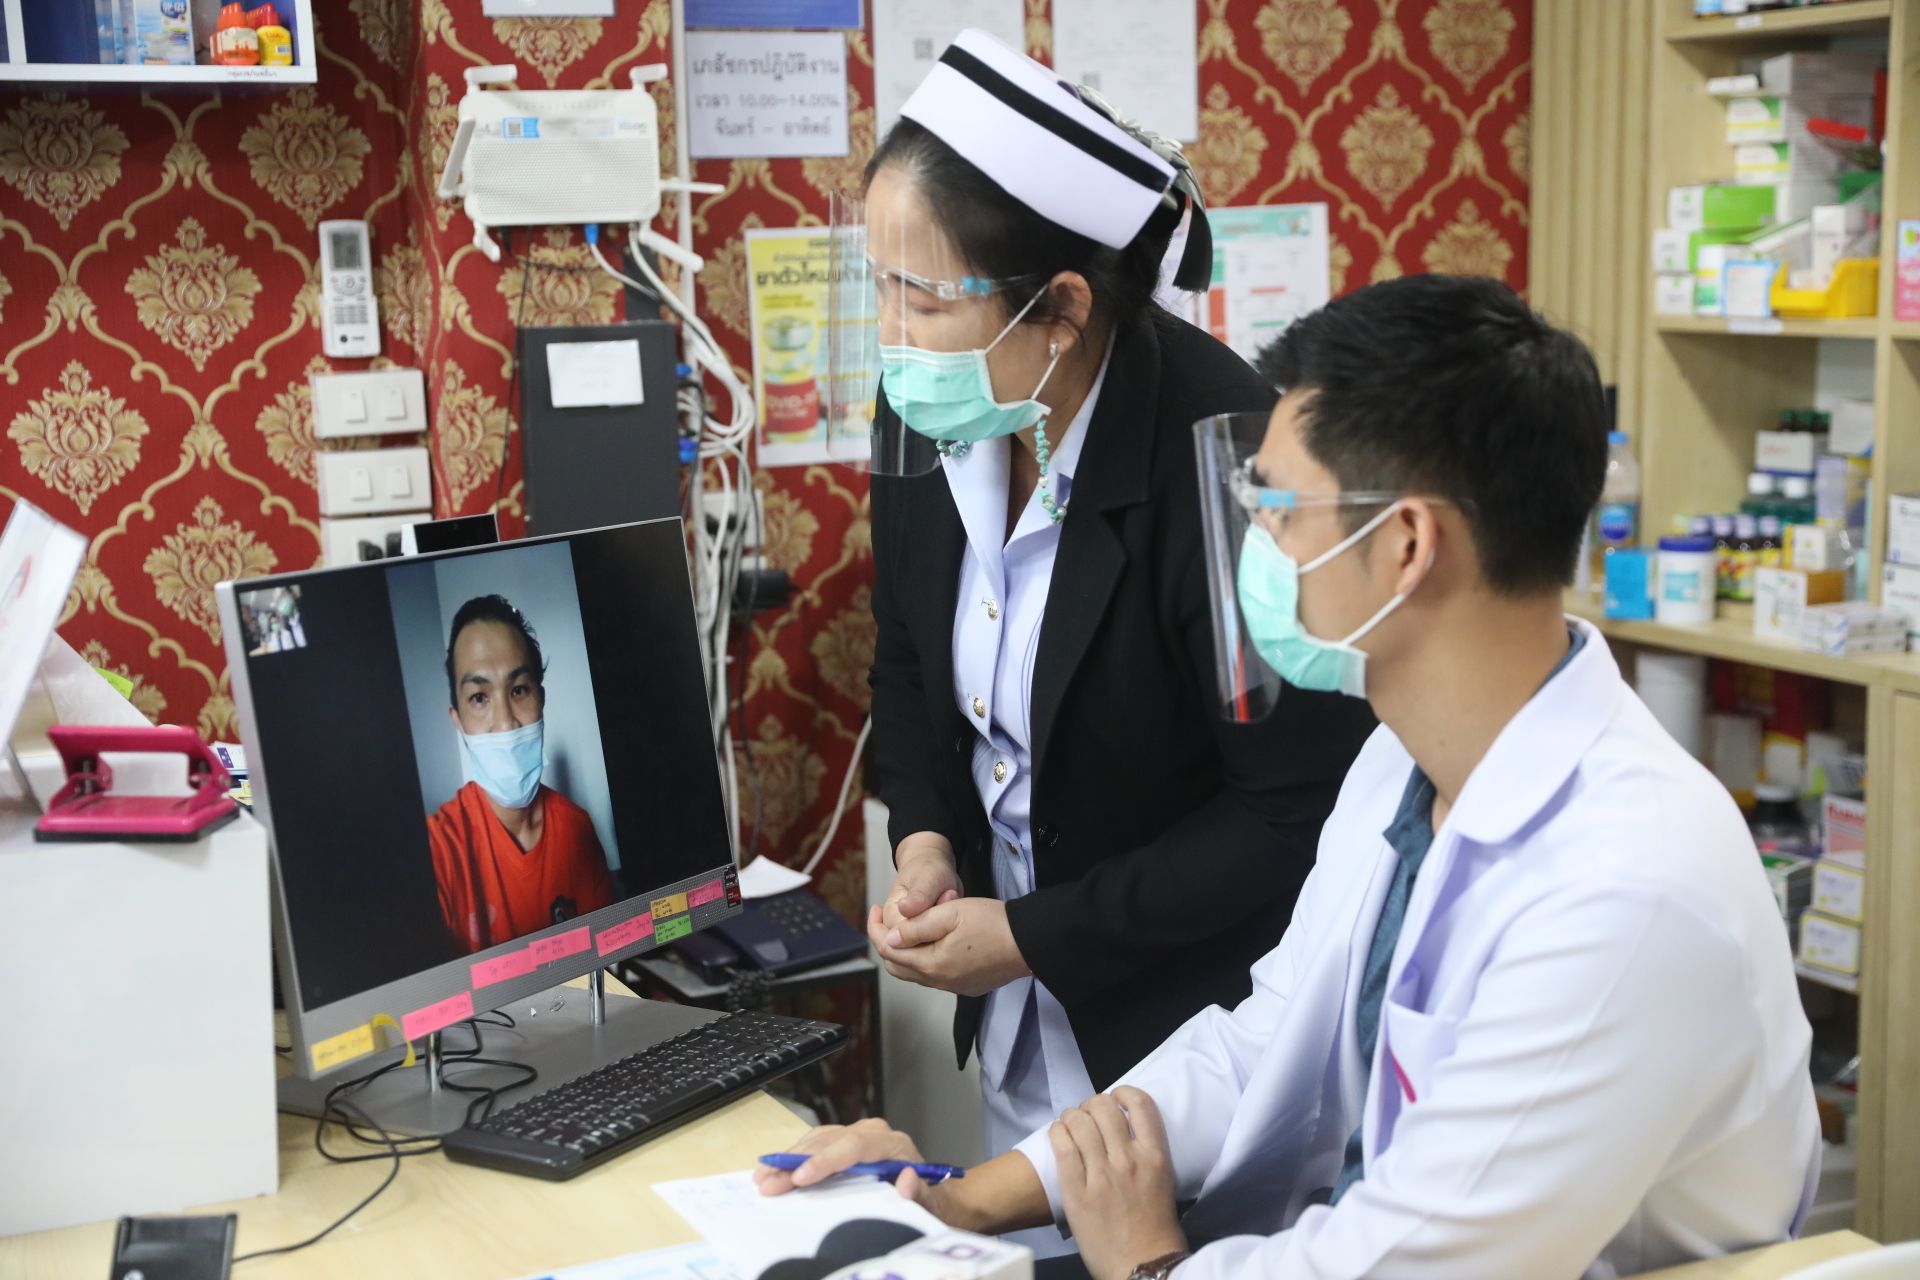 Public-private clinics partnership for COVID-19 home isolation implements in Thailand